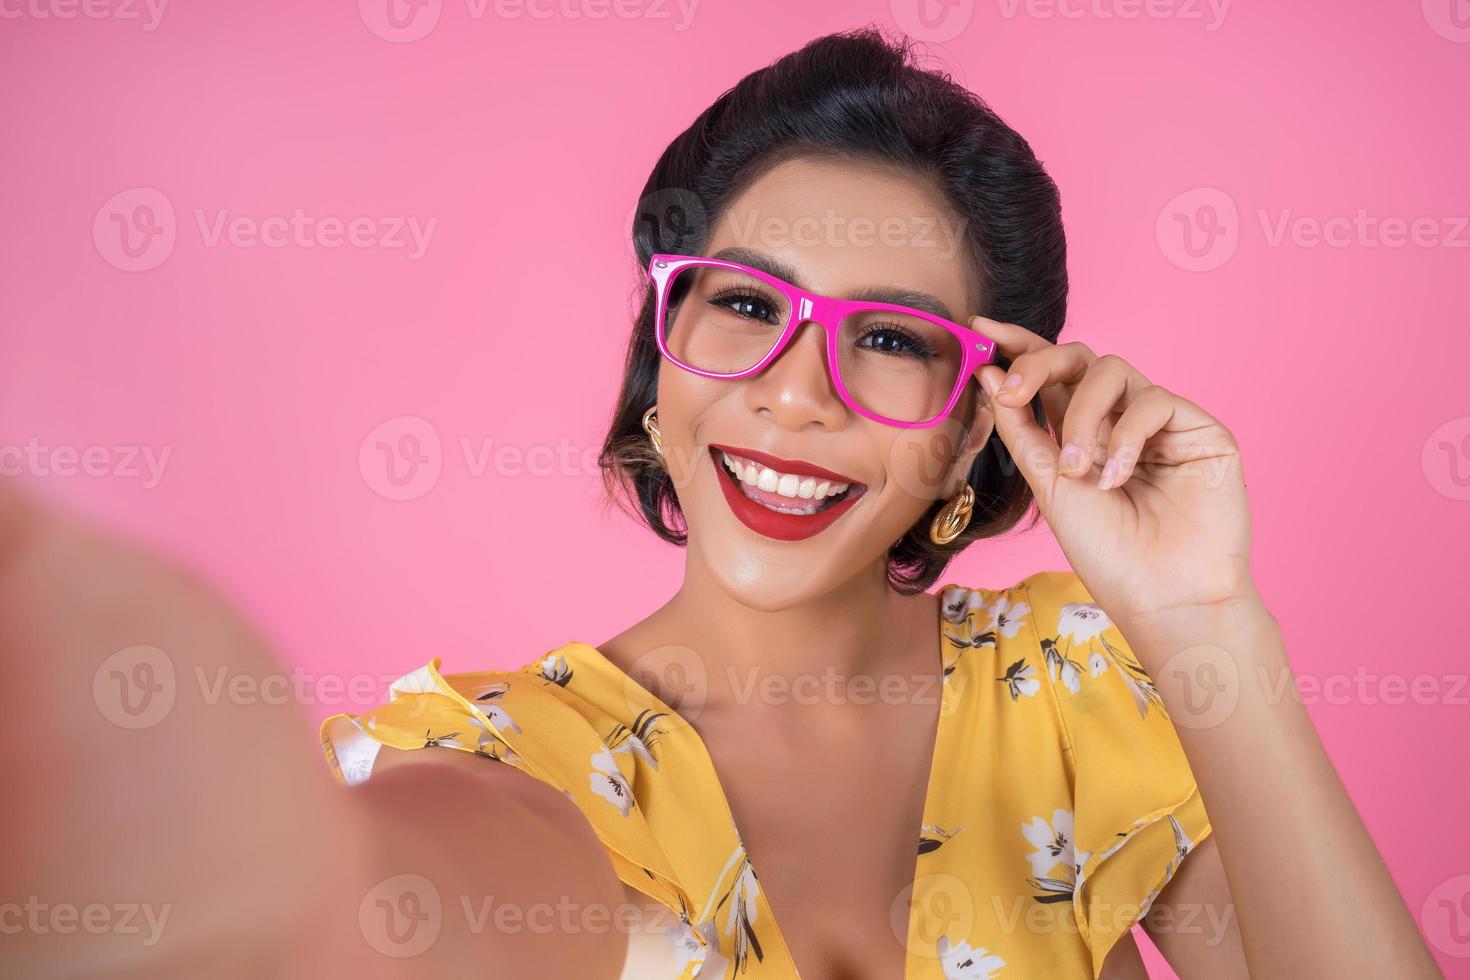 Beautiful fashionable woman taking a selfie with her phone photo